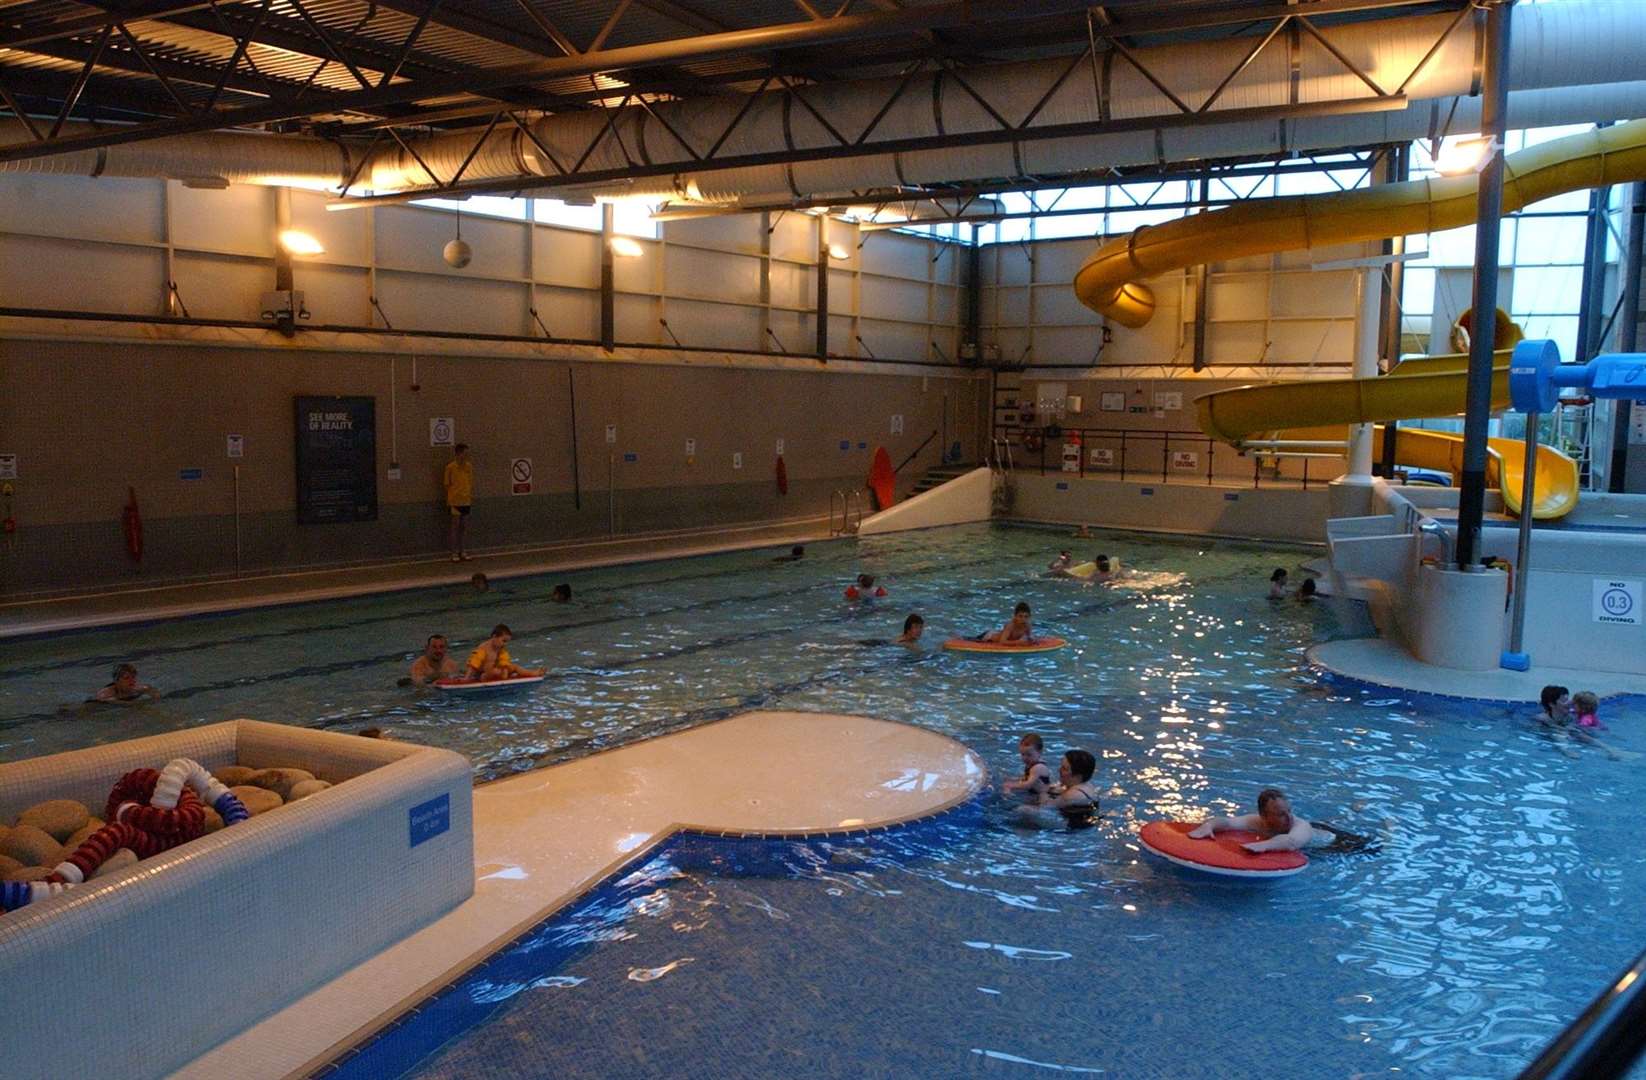 The pool pictured after a refurbishment in 2007